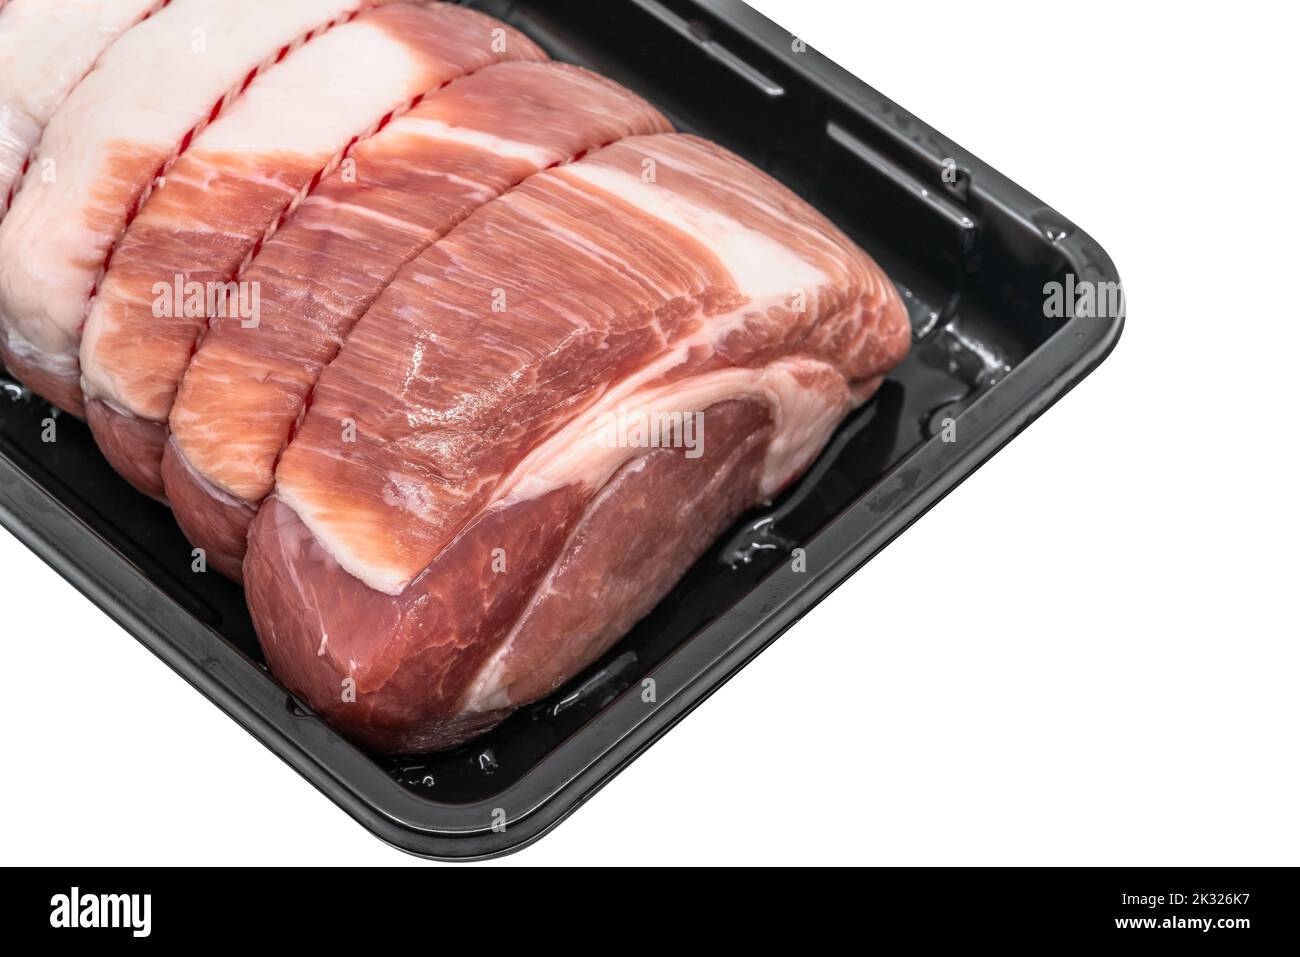 Close up a raw cut of pork loin, tied up and rolled with butcher's string in a black plastic container, 45-degree angle view, detailed tissue of fresh Stock Photo